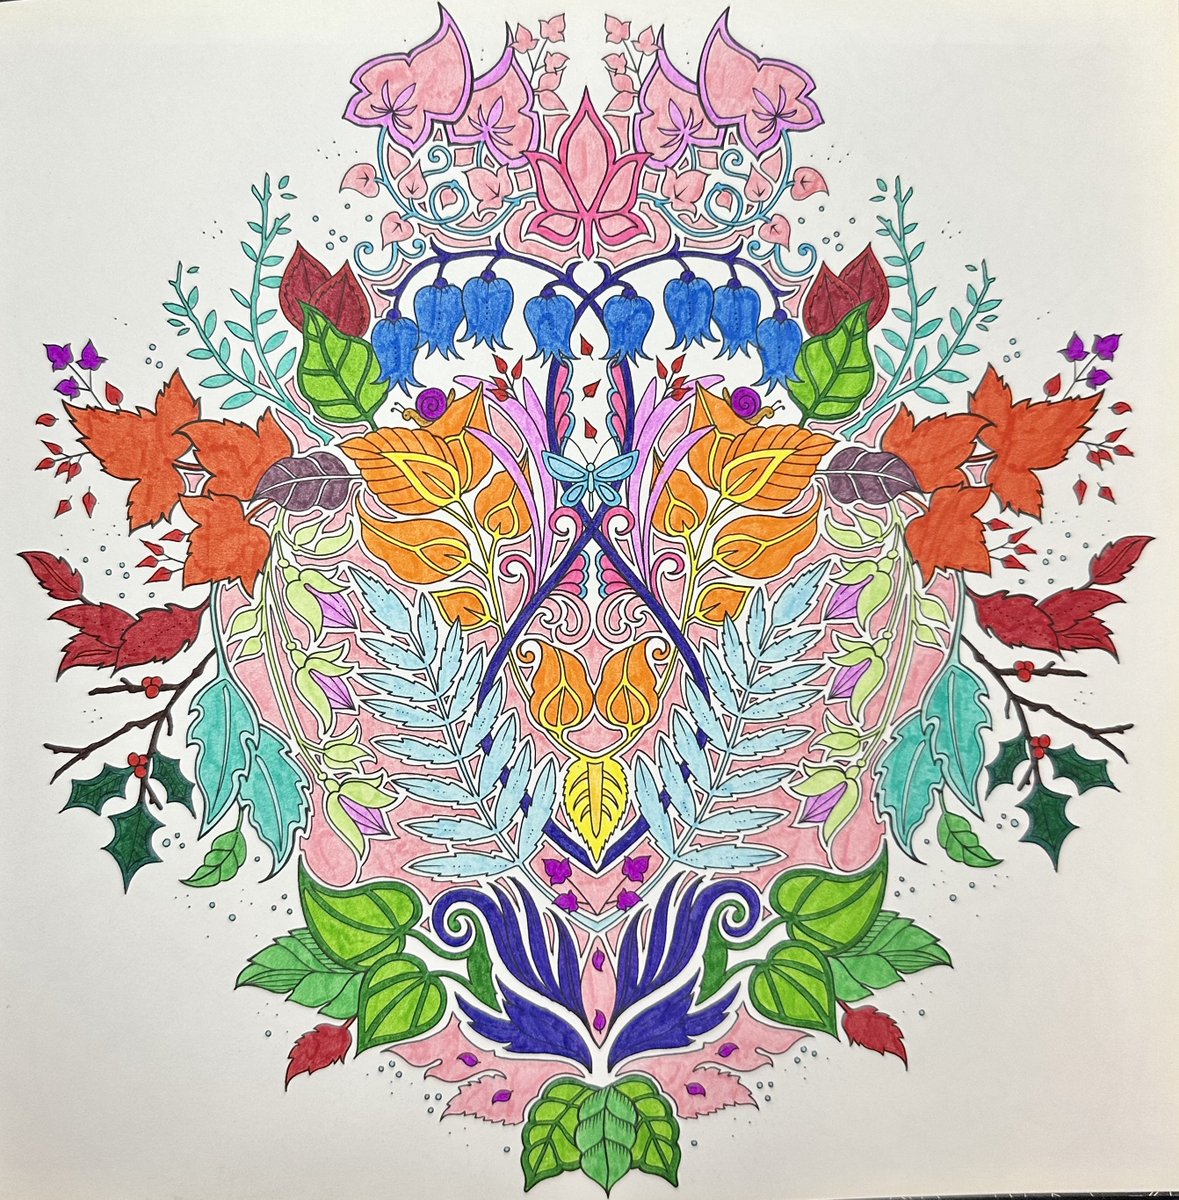 Completed colouring the leaf crest page from the enchanted forest adult colouring book by johanna basford
link: youtu.be/NysVz_I7AVE
#Scarlet1449 #ArtsandCrafts #EnchantedForest #JohannaBasford #FloralSkull #AdultColouring #AdultColouringBook #Timelapse #Leaf #Crest #LeafCrest